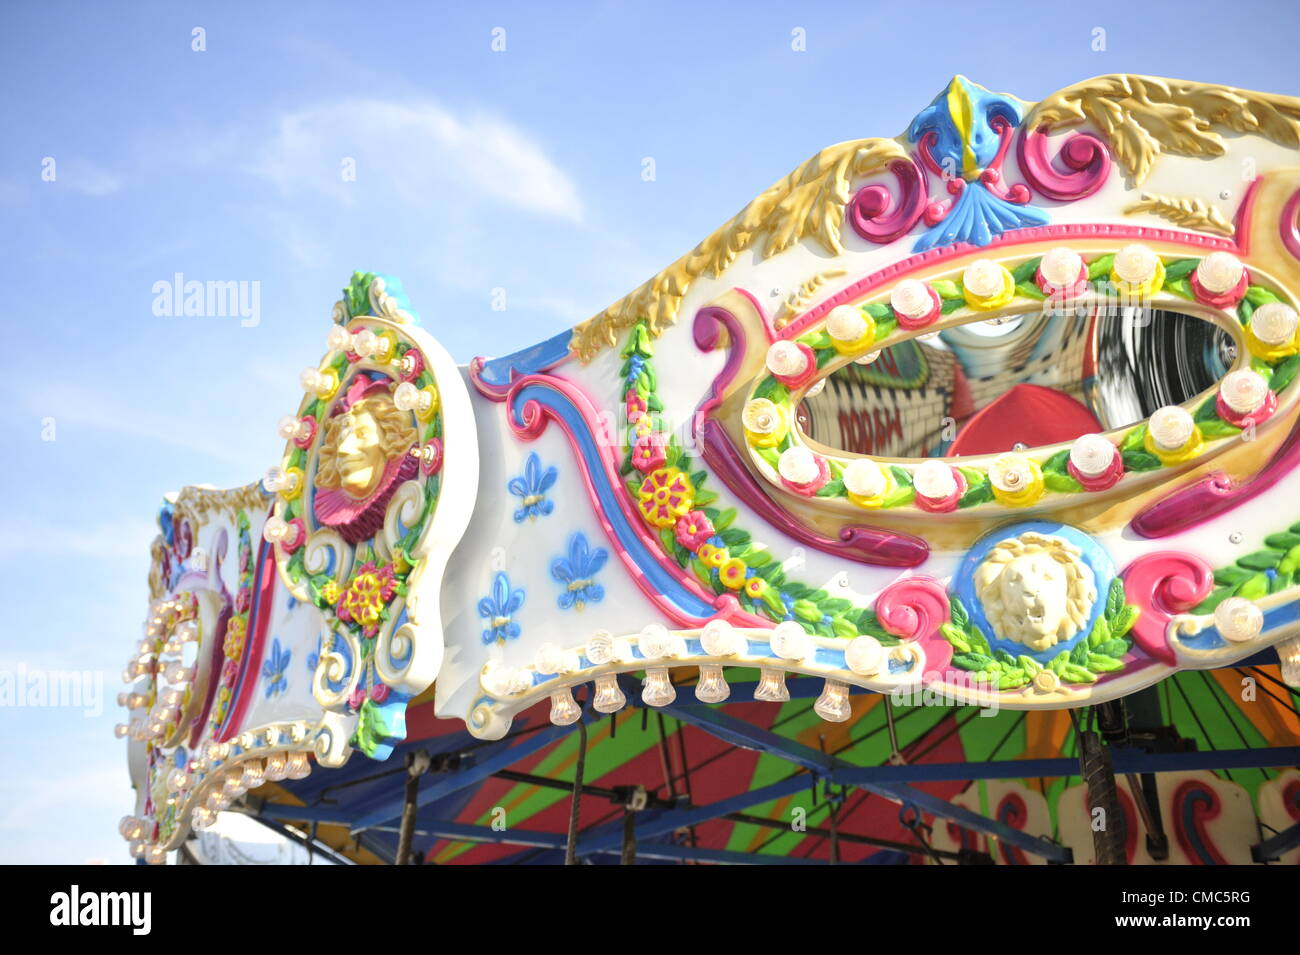 Carousel or Merry-Go-Round colorful pastel ornate Top closeup with blue sky Stock Photo